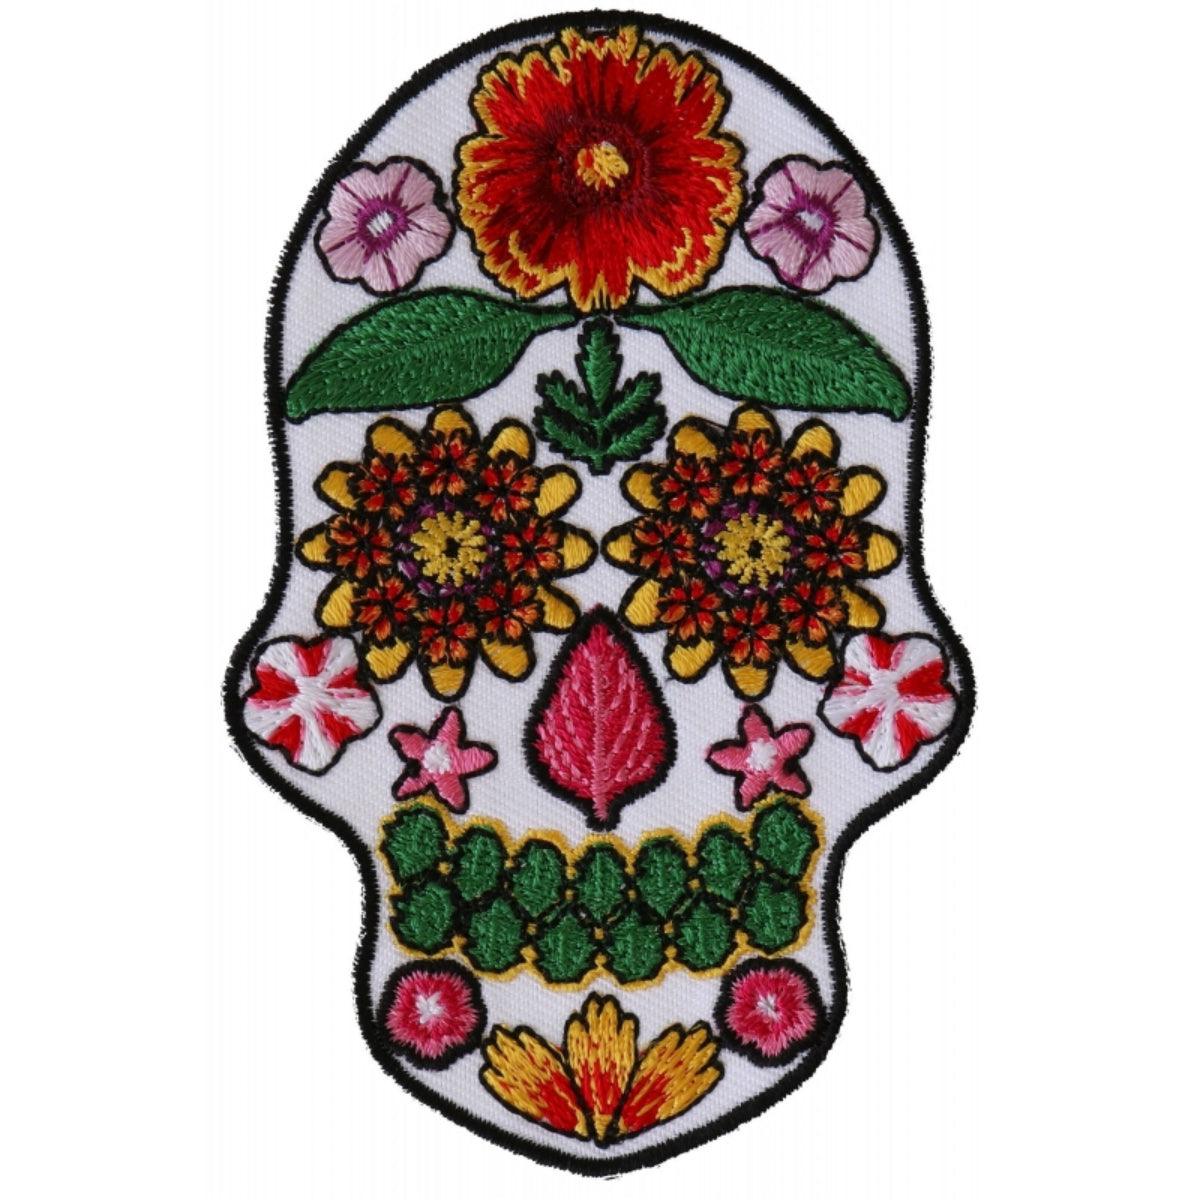 Daniel Smart Flower Skull Embroidered Iron on Patch, White, 2.6 x 4 inches - American Legend Rider